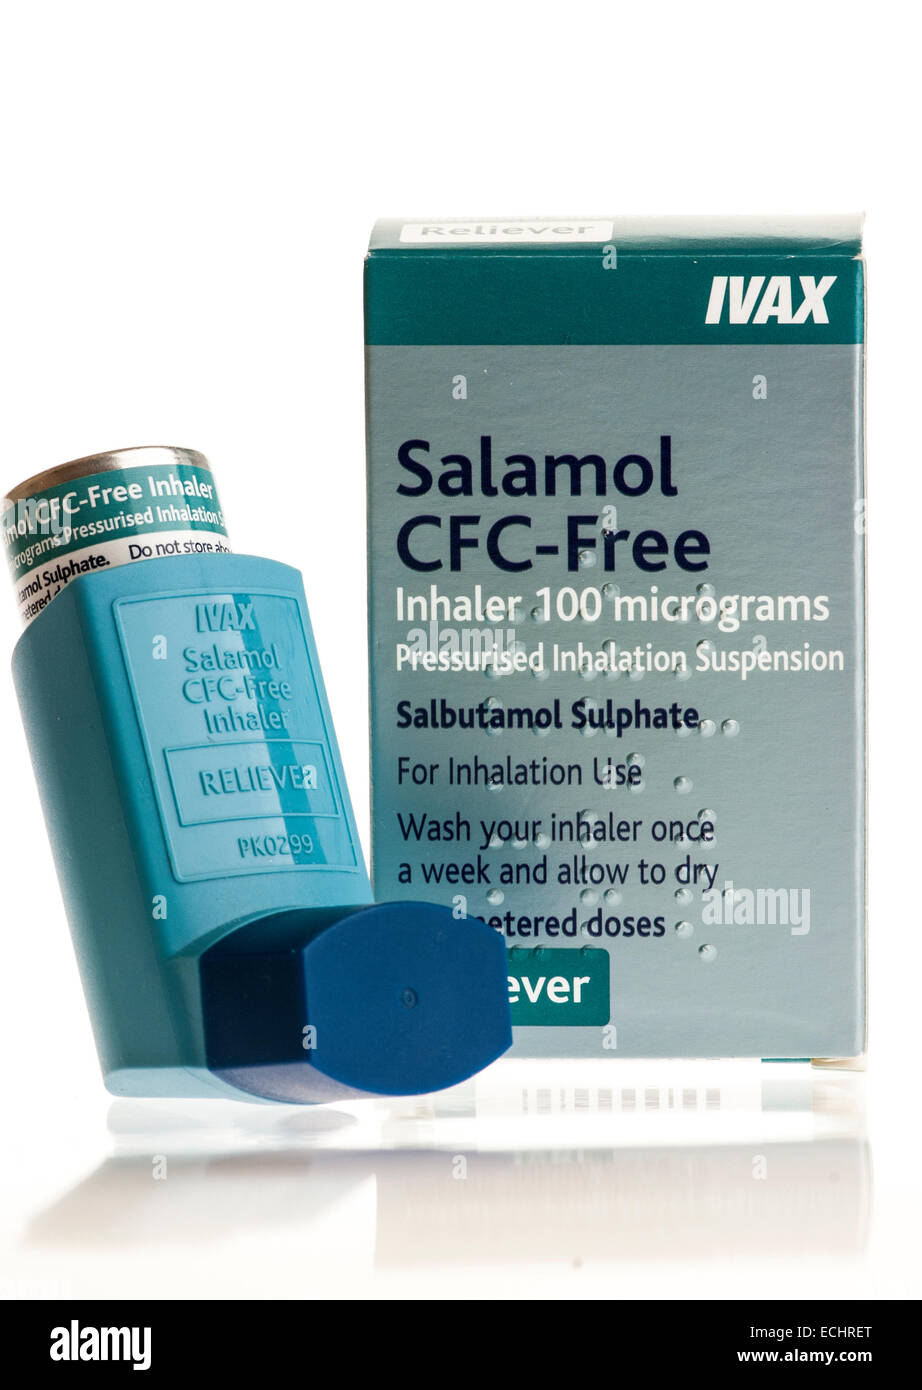 Salamol (Salbutamol Sulphate) inhaler for relief of broncheal spasms and inflammation. Stock Photo